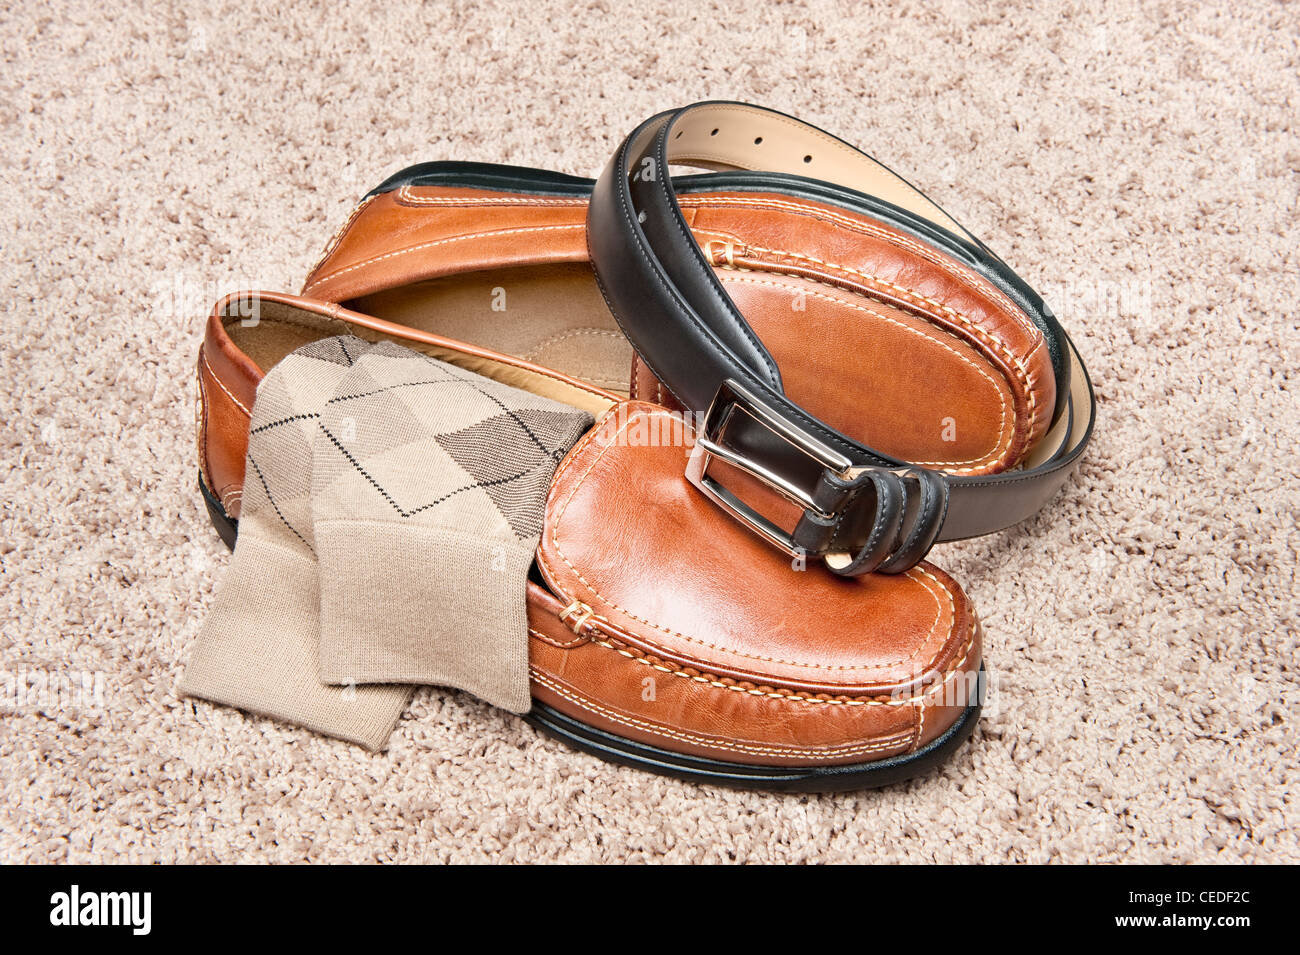 A new pair of tan leather shoes with socks and belt on beige carpet Stock Photo